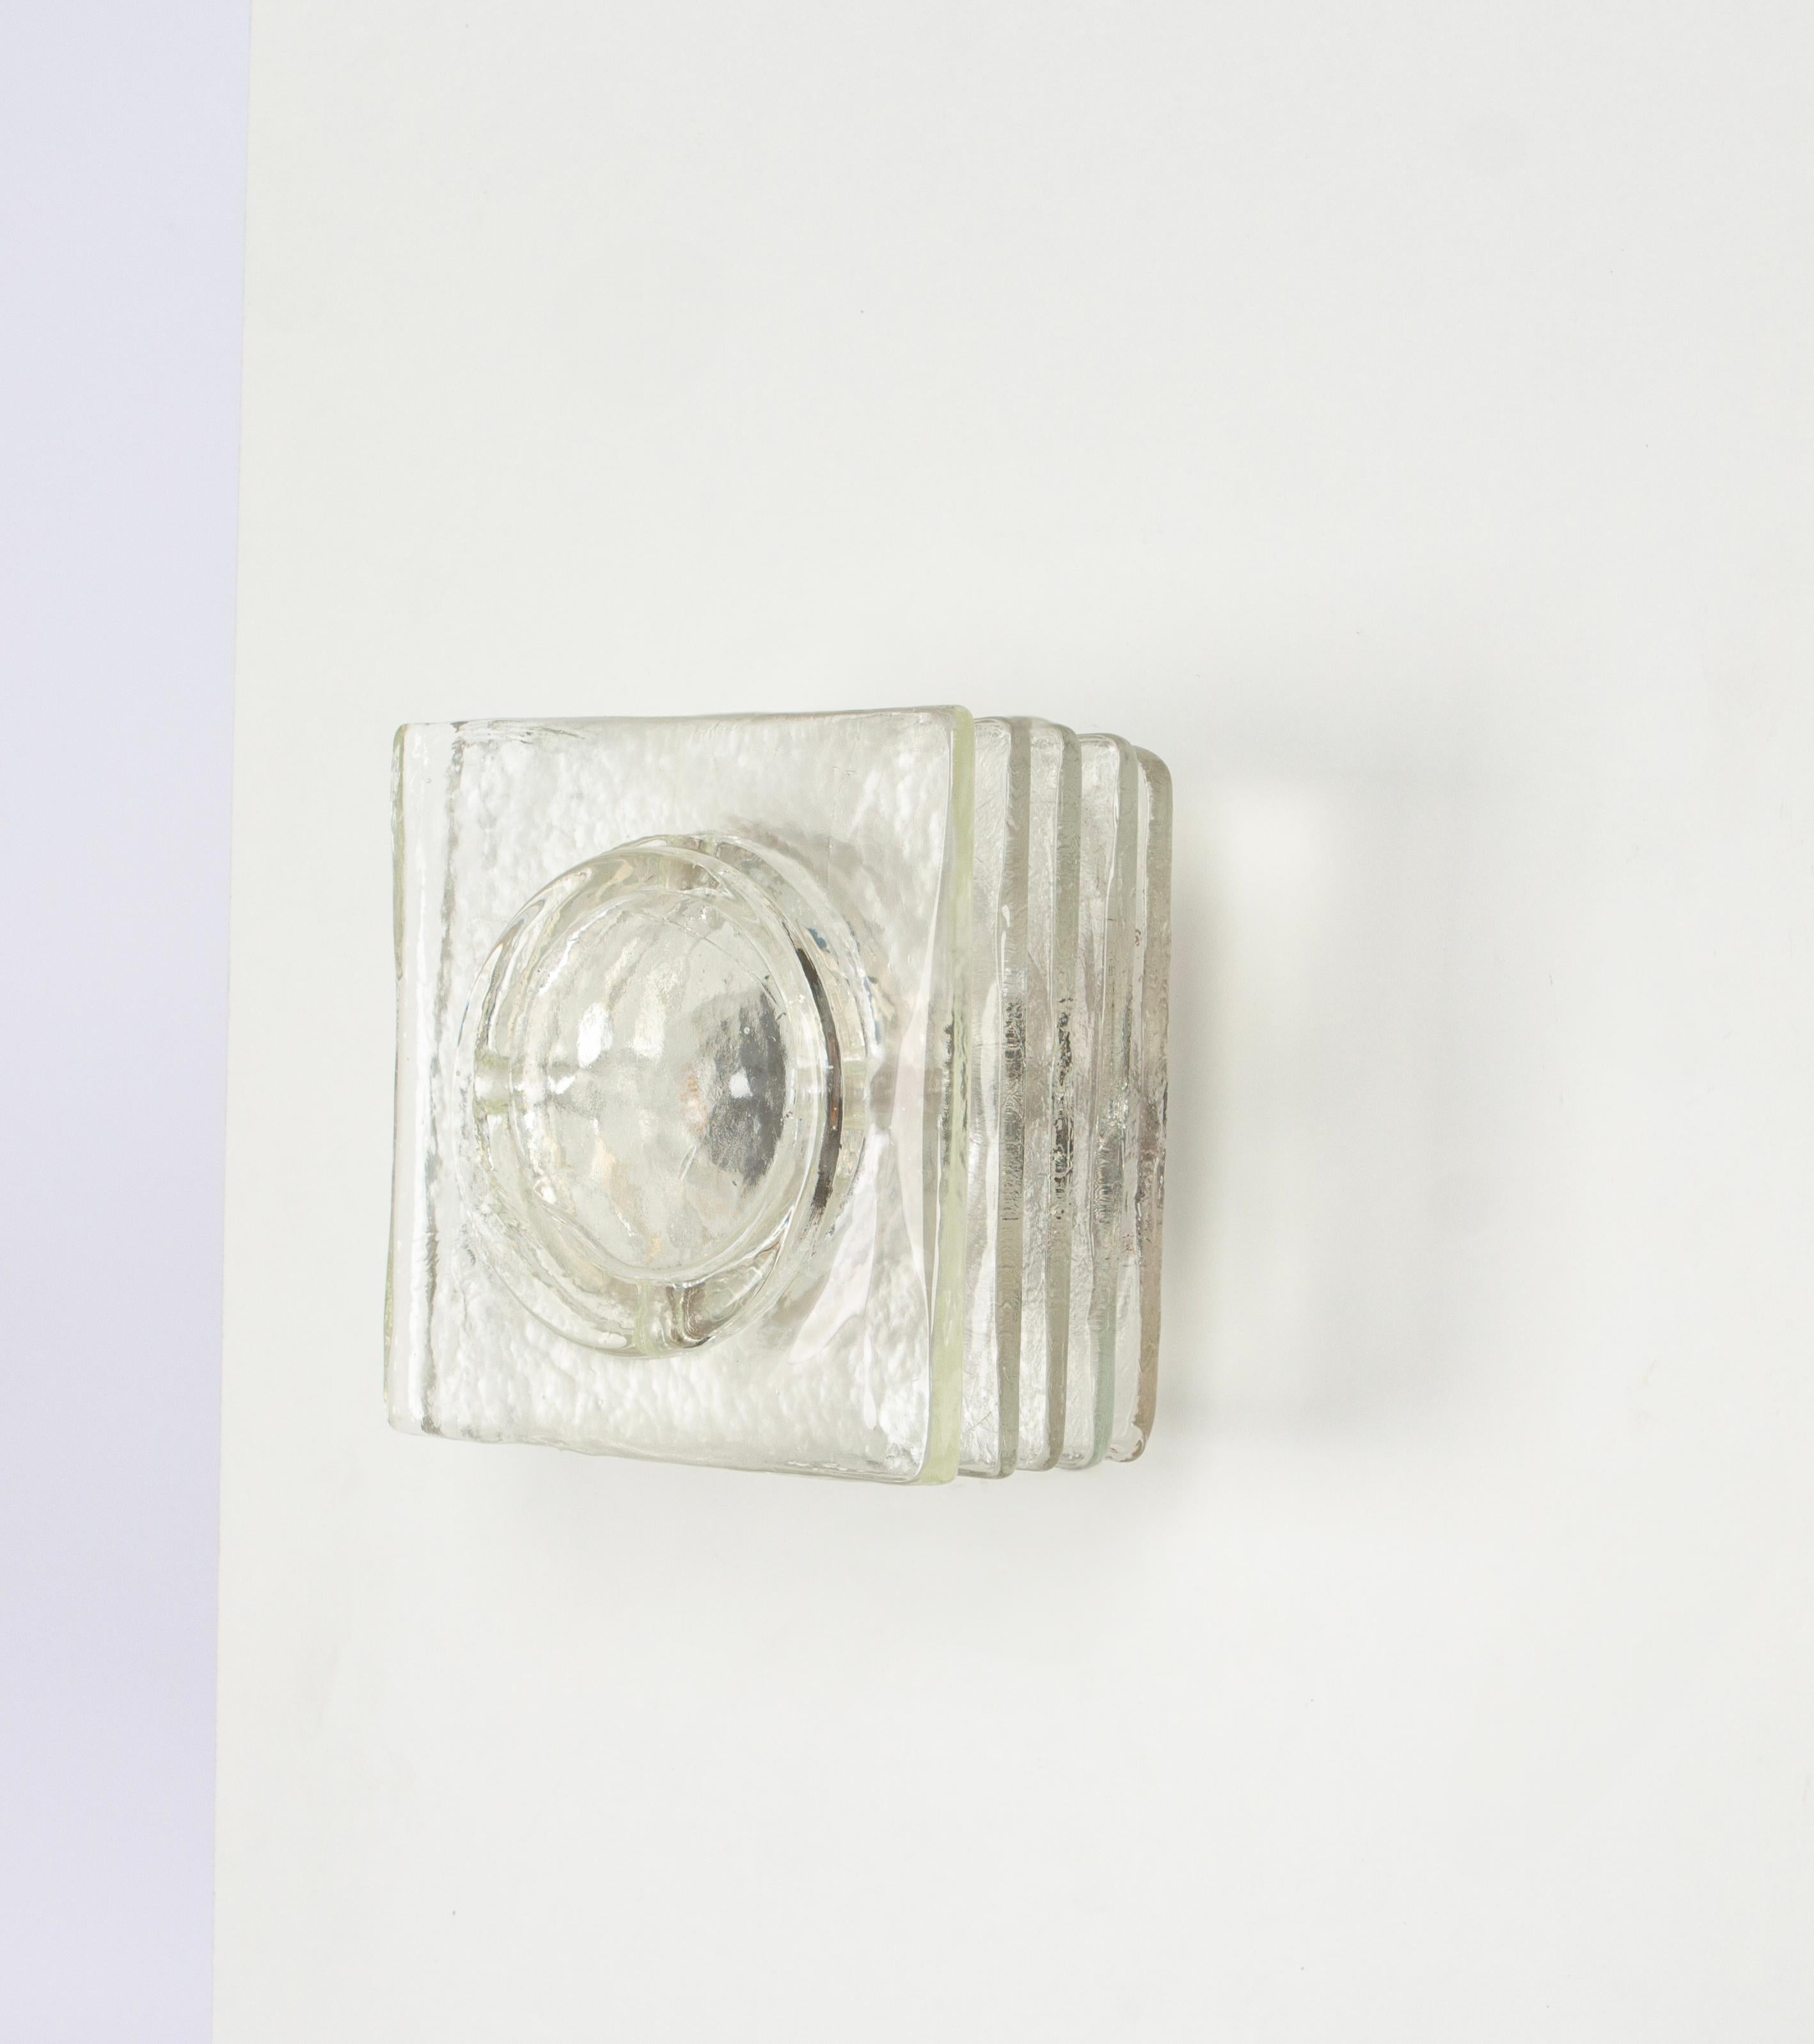 Pair of Cubic Mid-Century Wall Sconce in style of Poliarte, 1970s For Sale 1